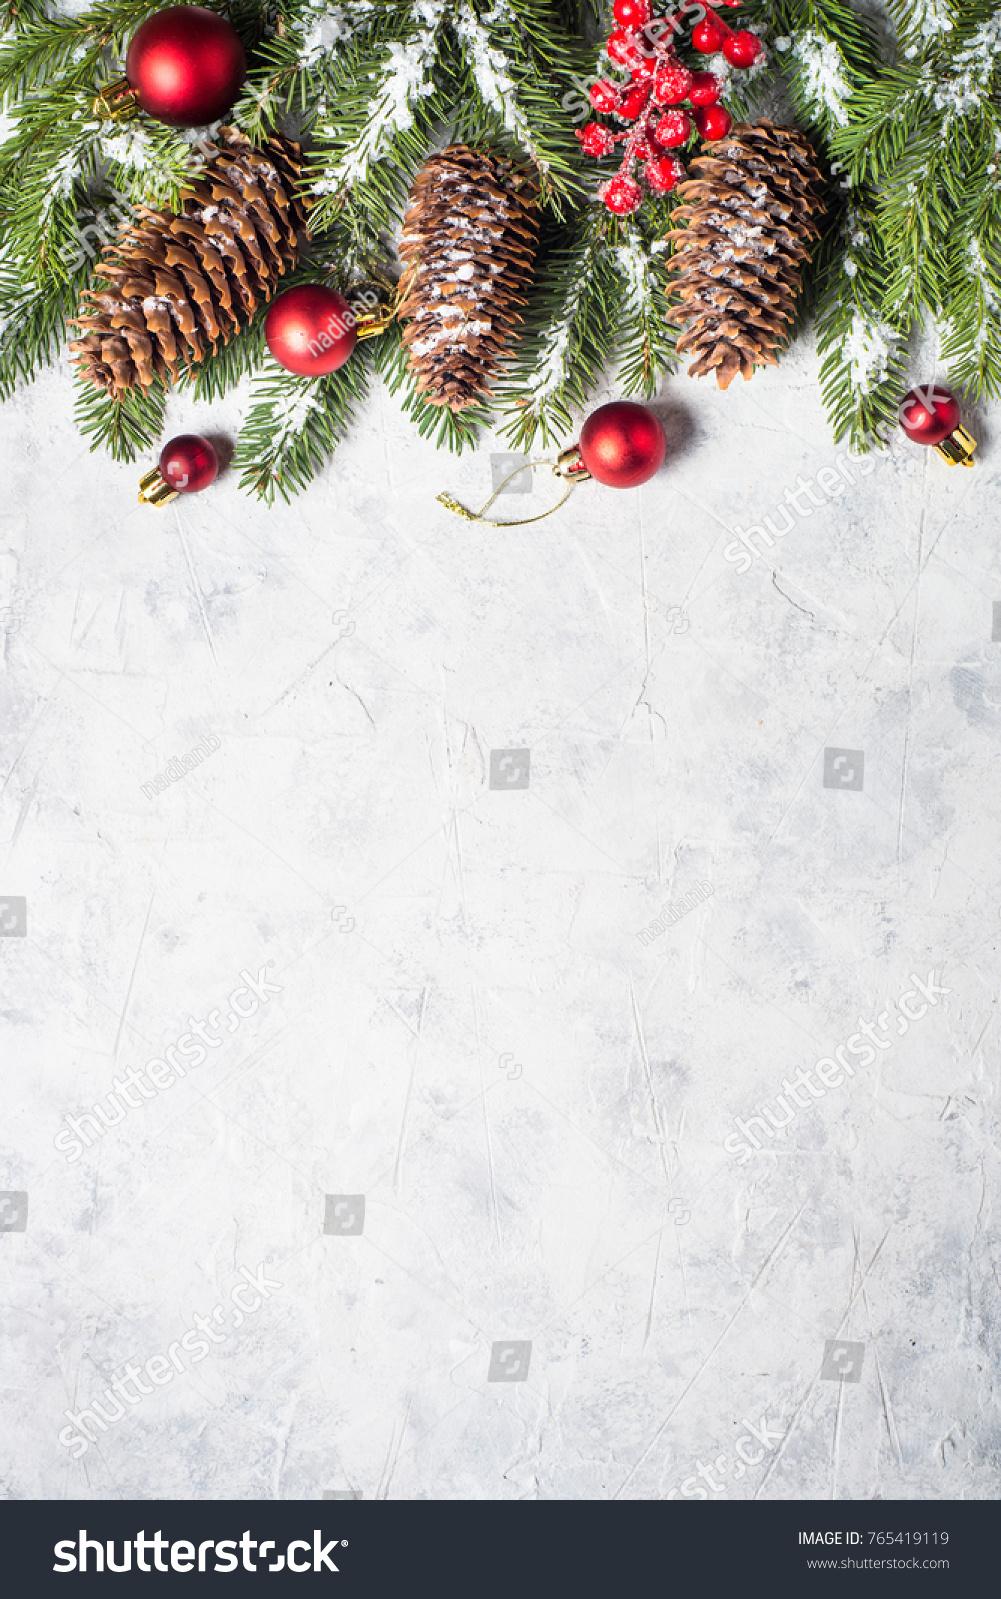 Christmas Background Vertical Image Stock Photos